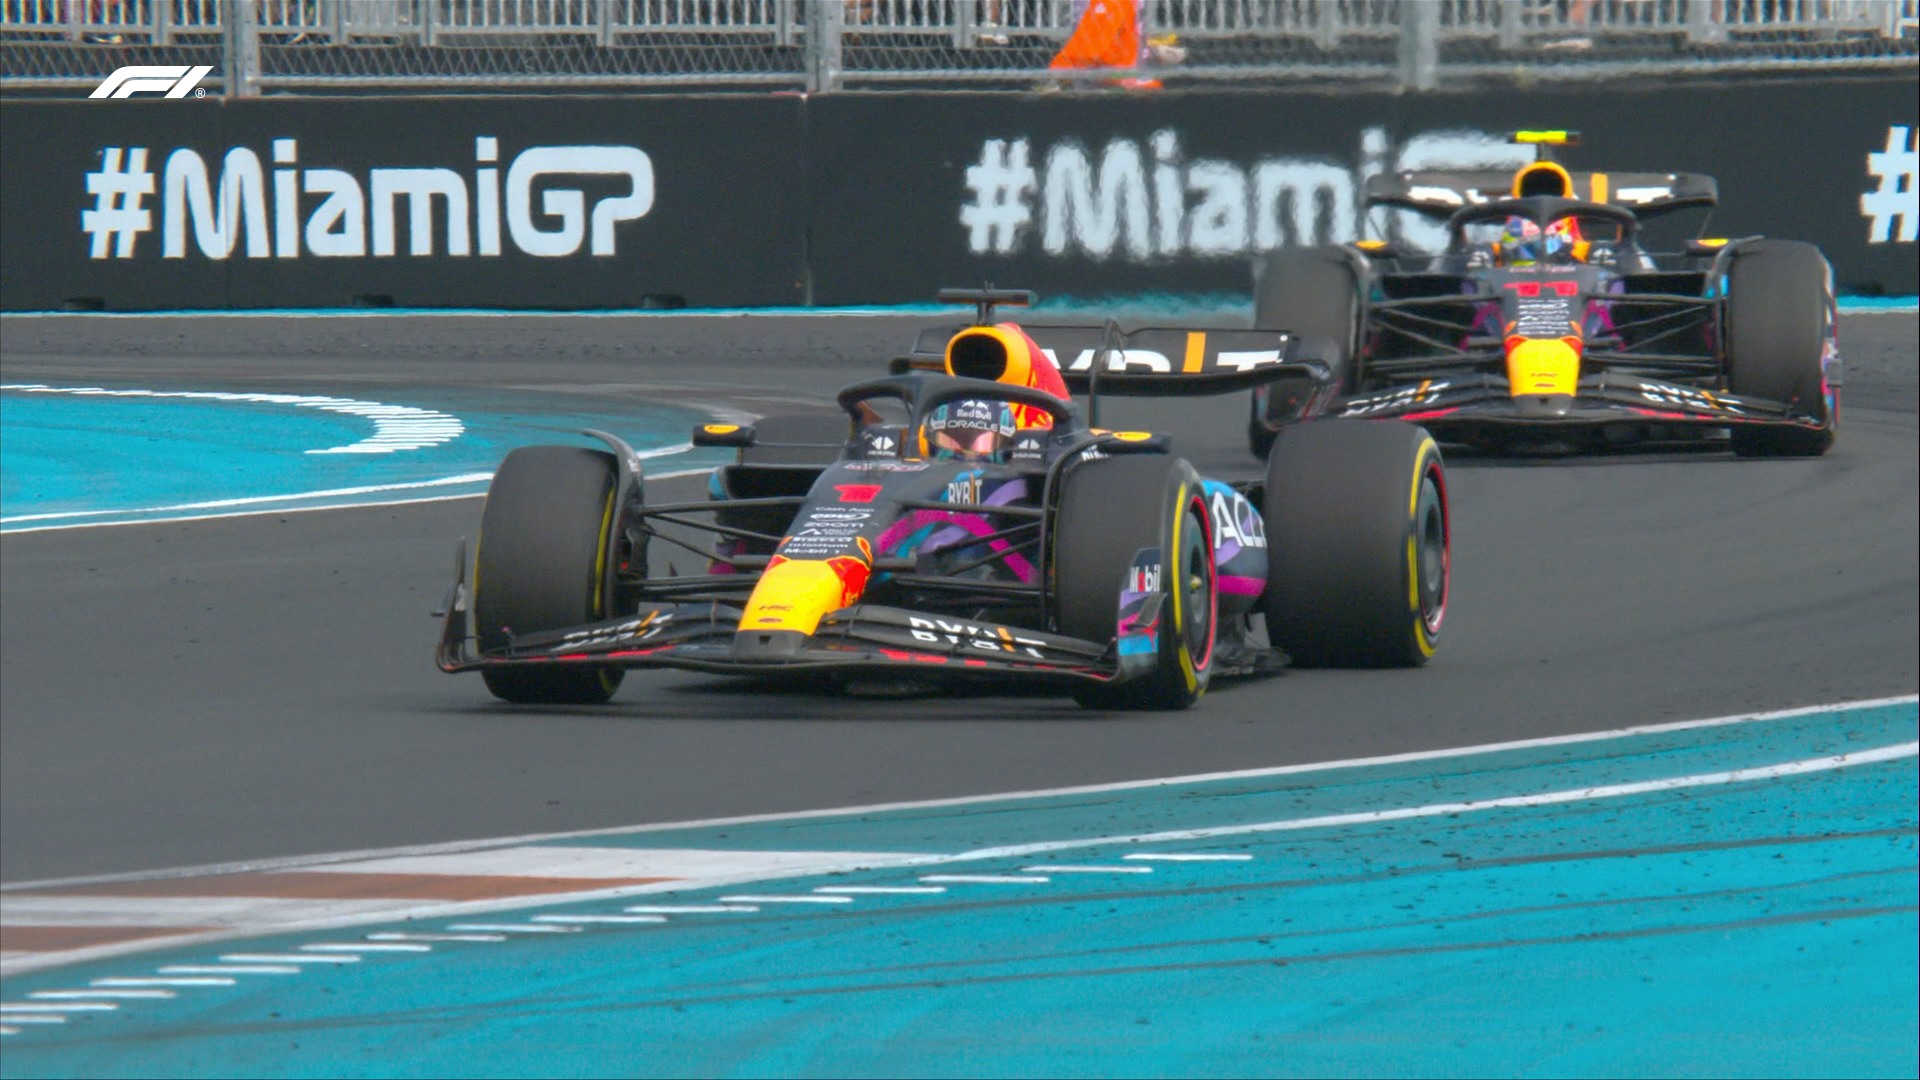 Verstappen won the first direct duel with Checo of the season